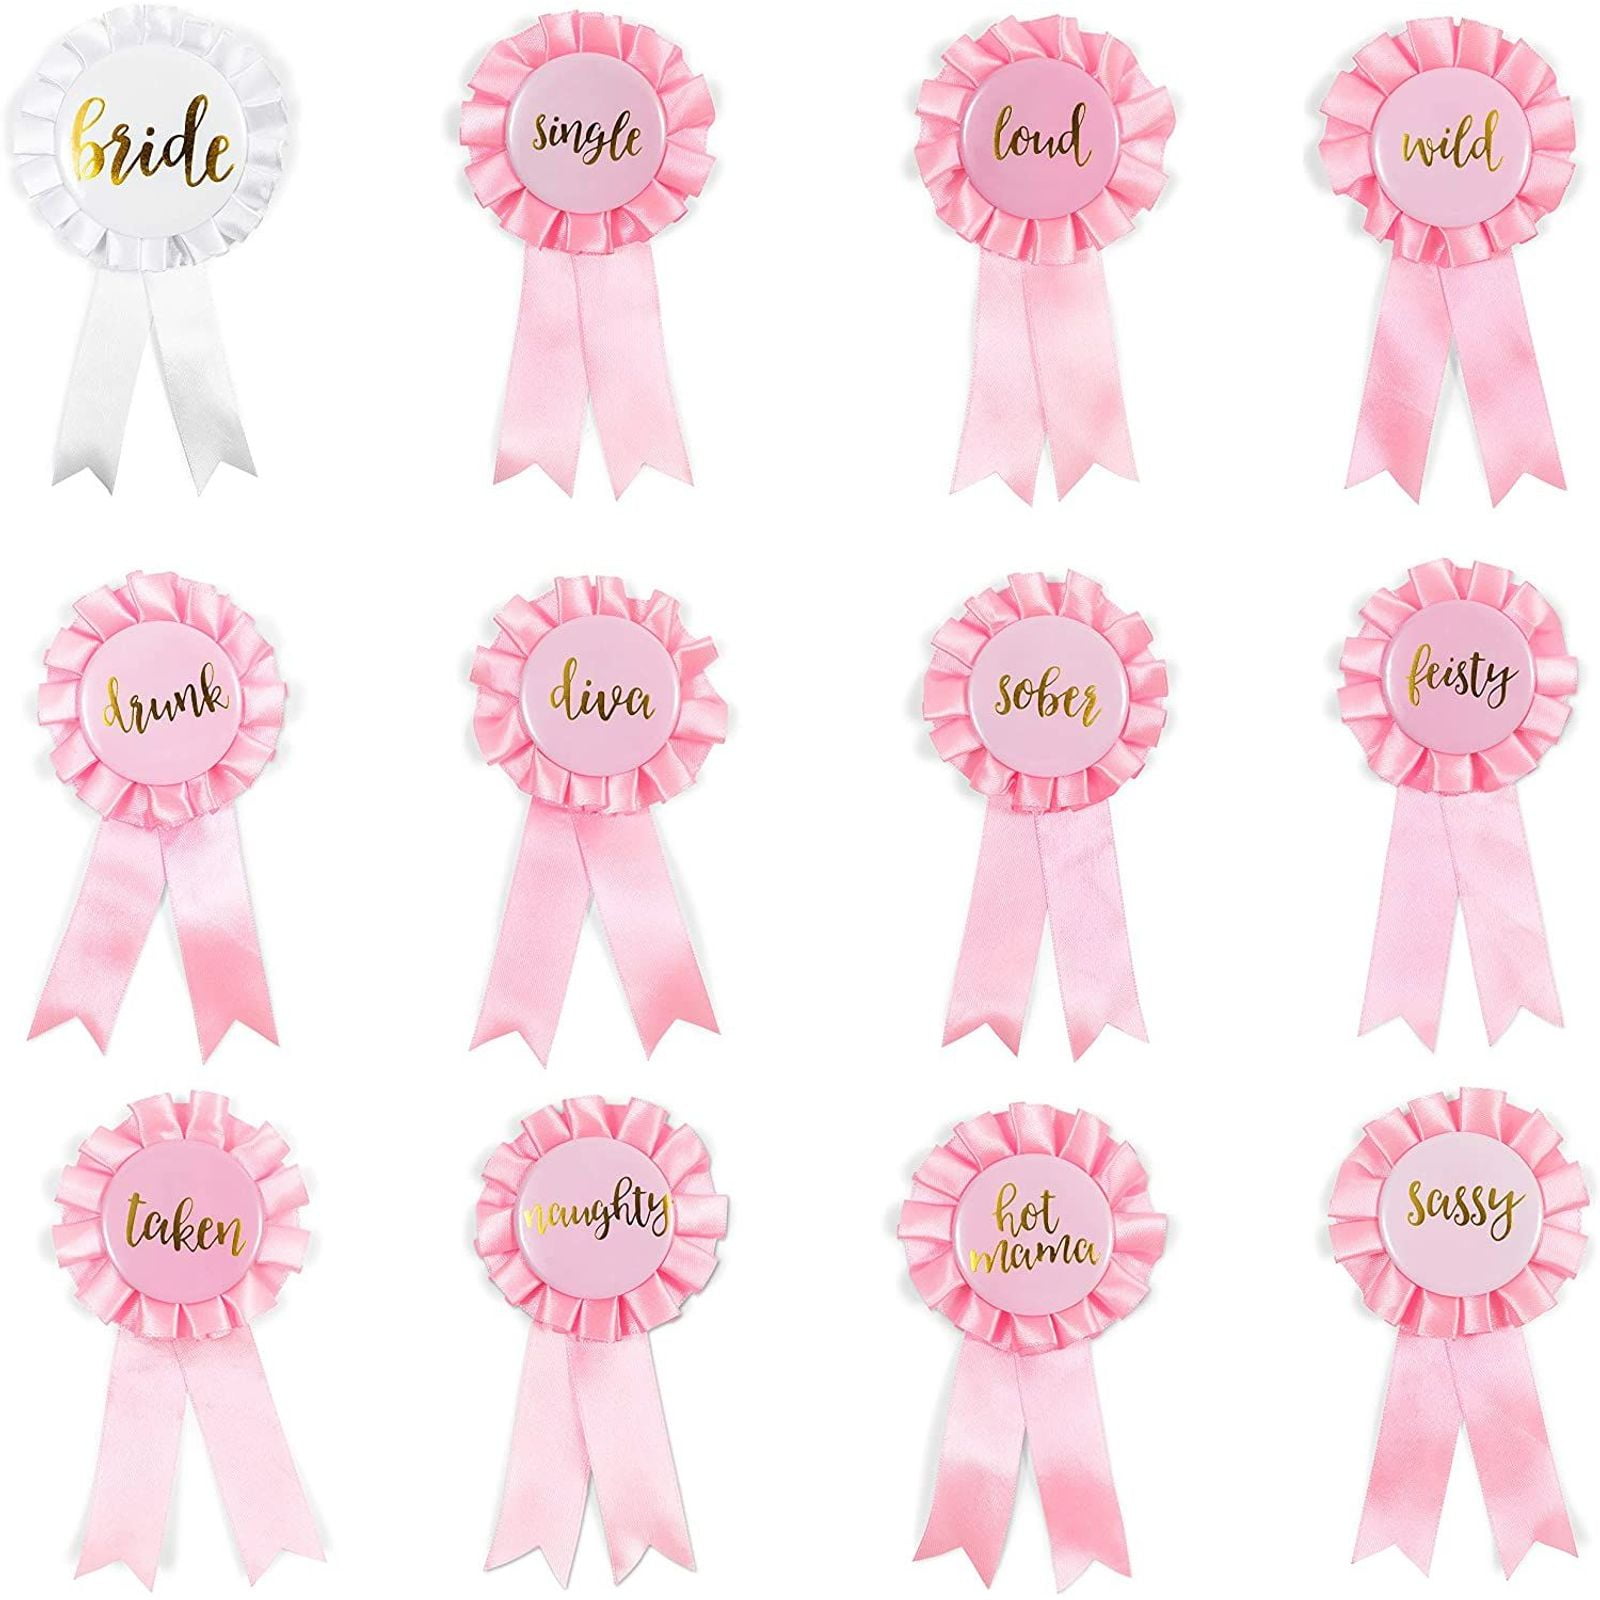 12 ~ Party Supplies Treat Loot BABY SHOWER Cute as a Button GIRL FAVOR BAGS 